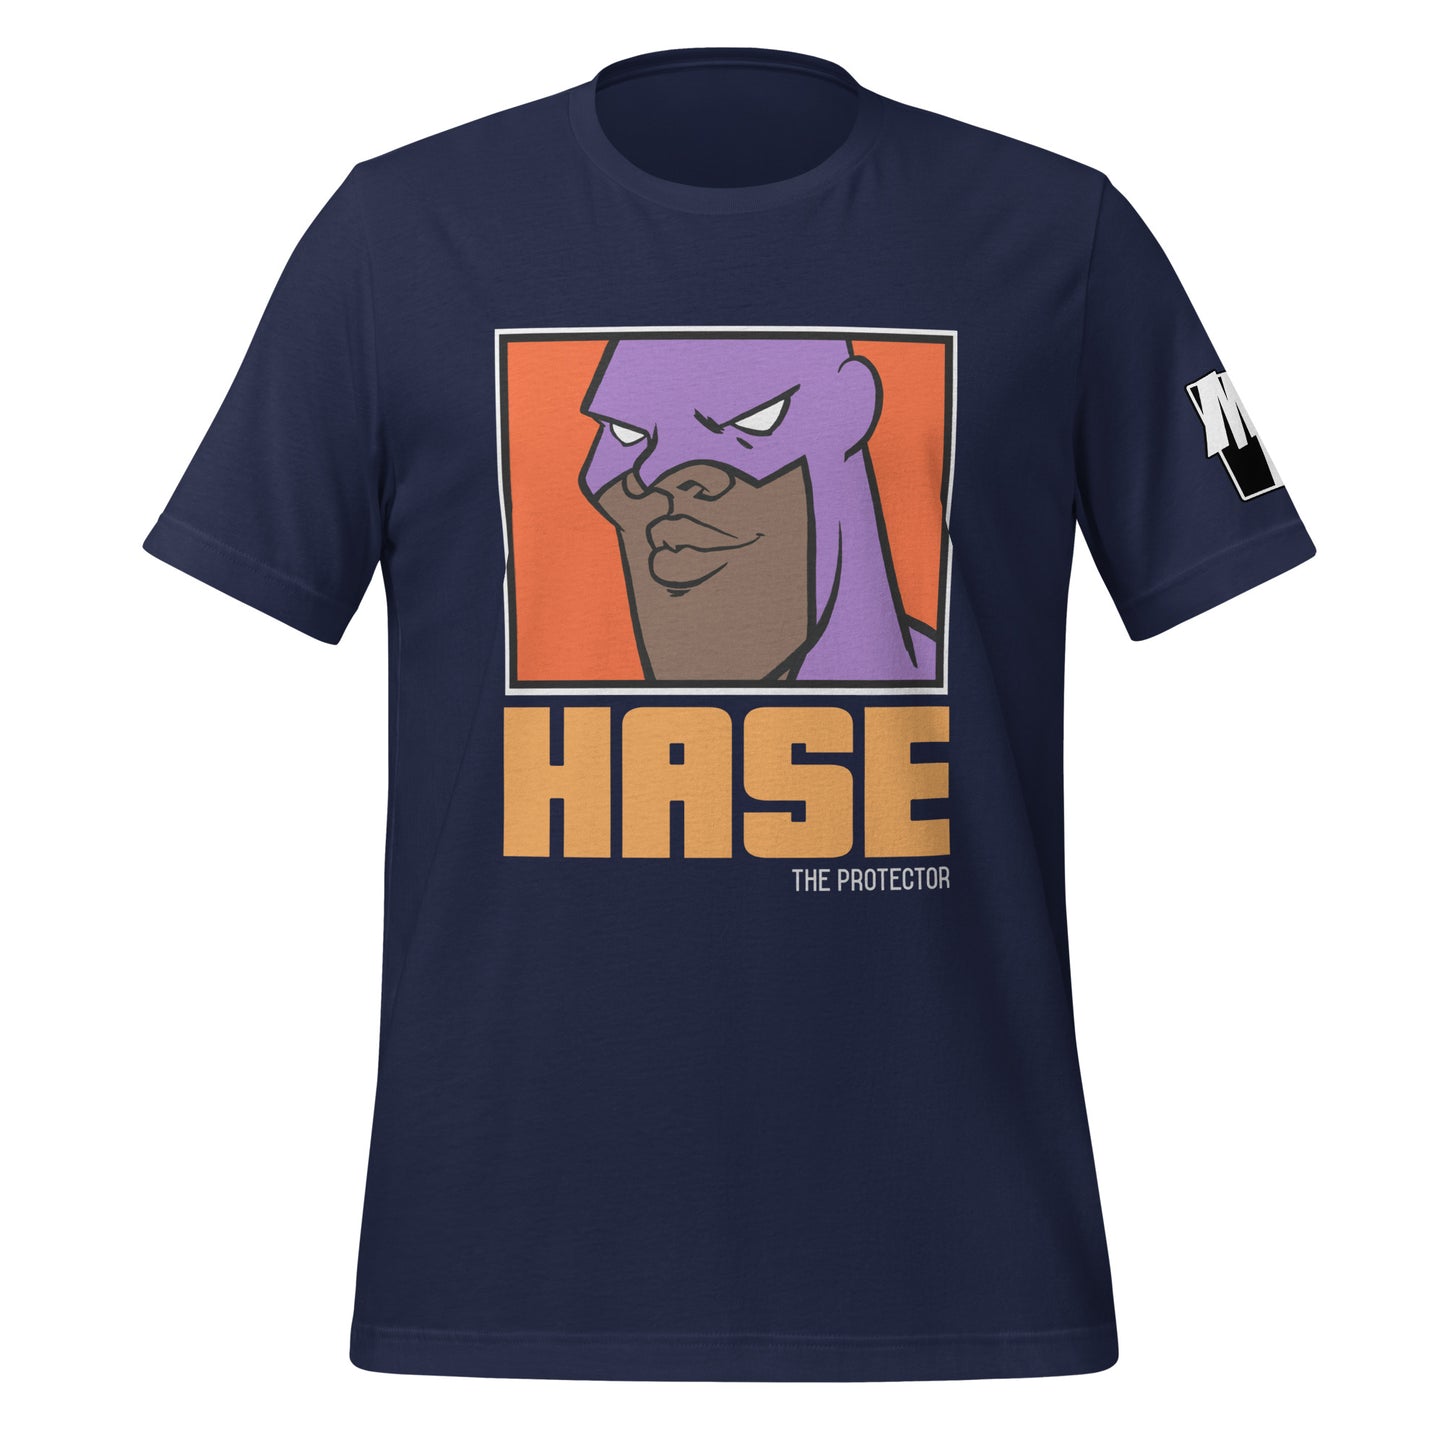 HASE (THE PROTECTOR) T-Shirt